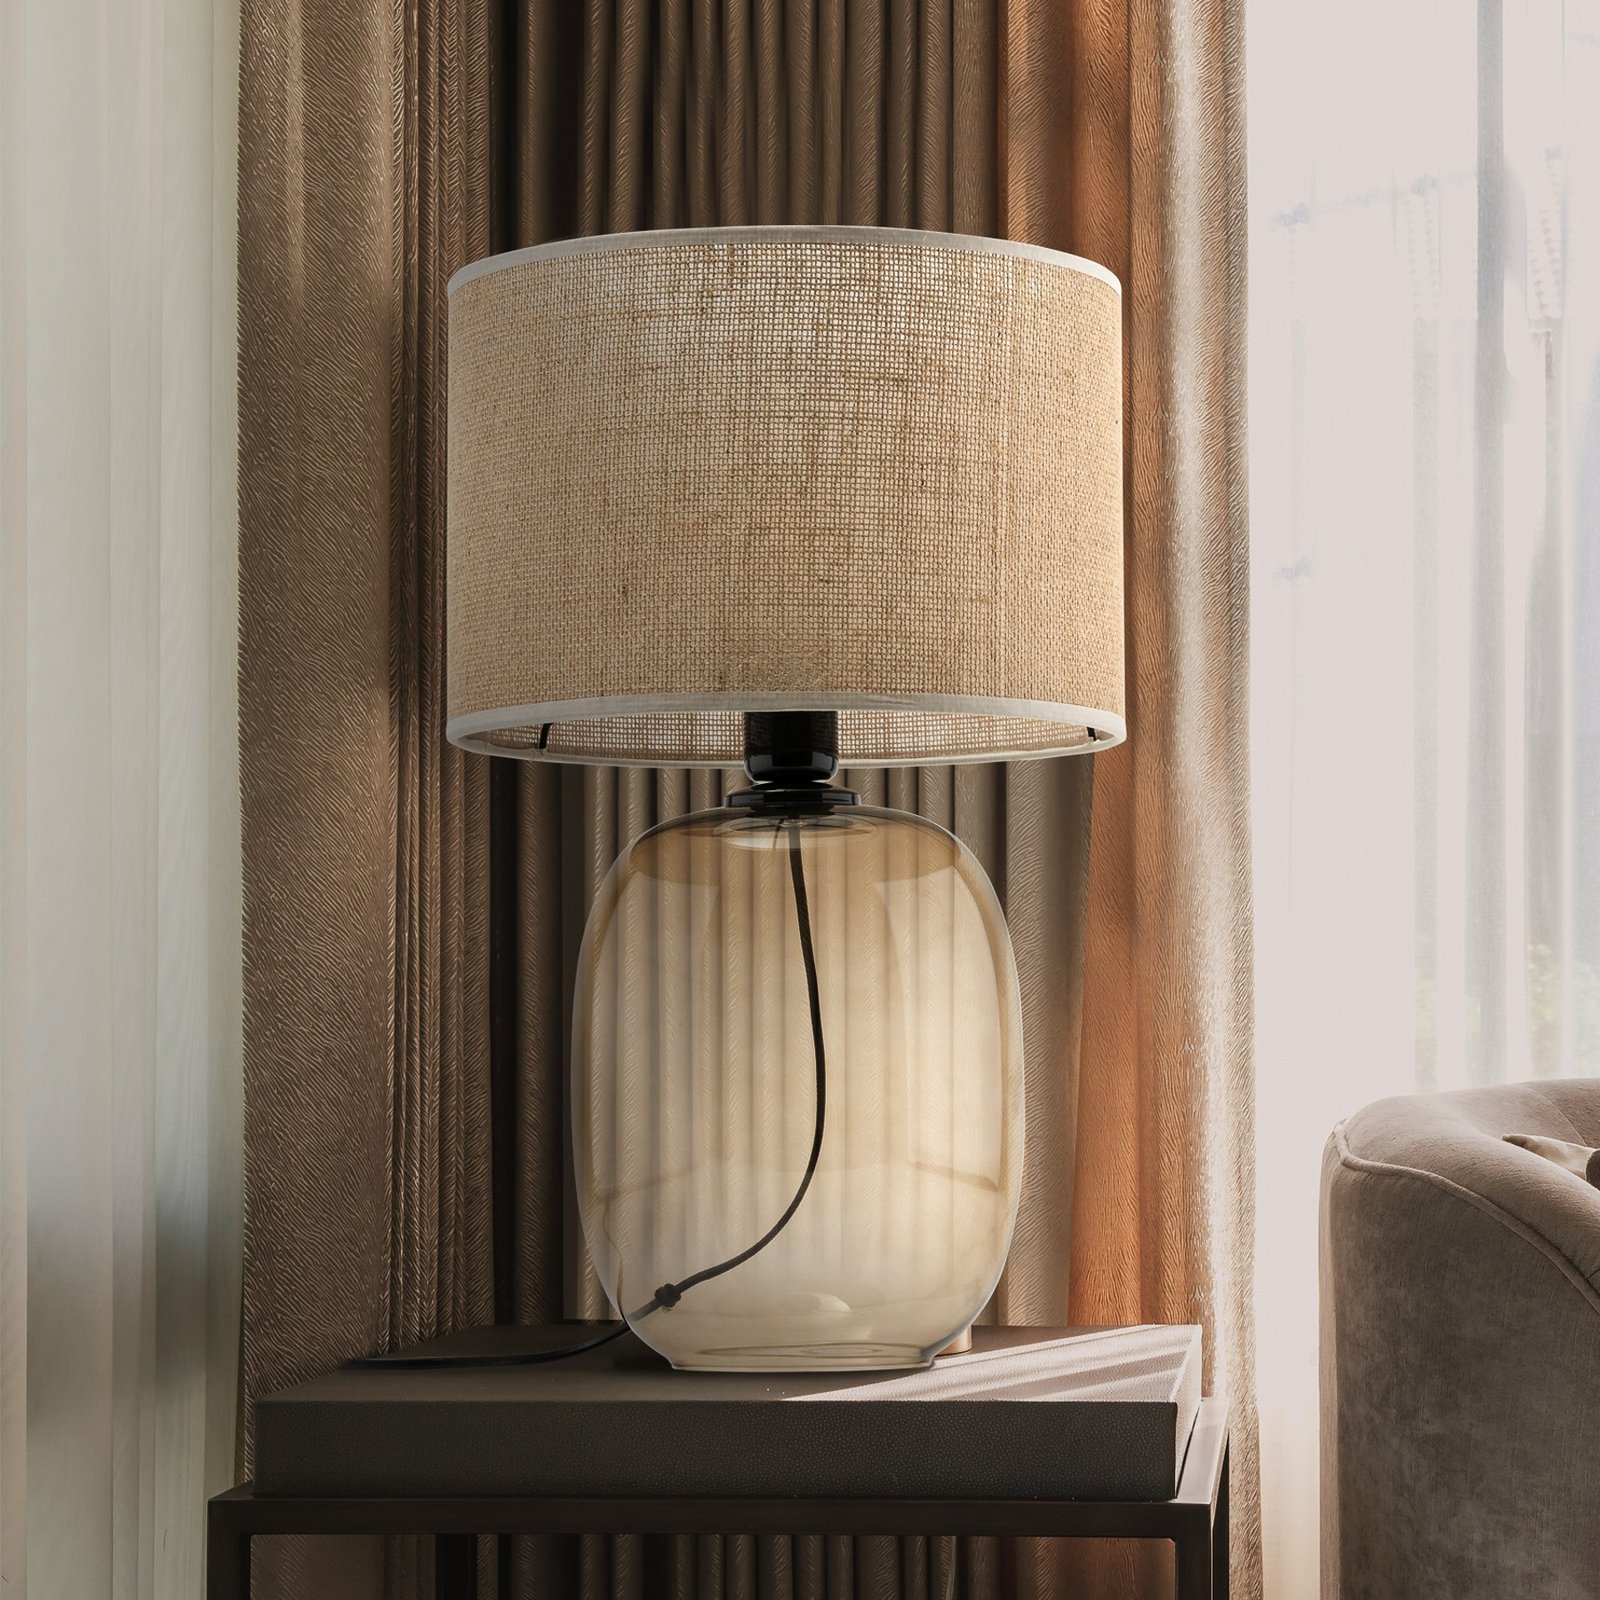 Melody table lamp, height 48 cm, brown glass, natural jute